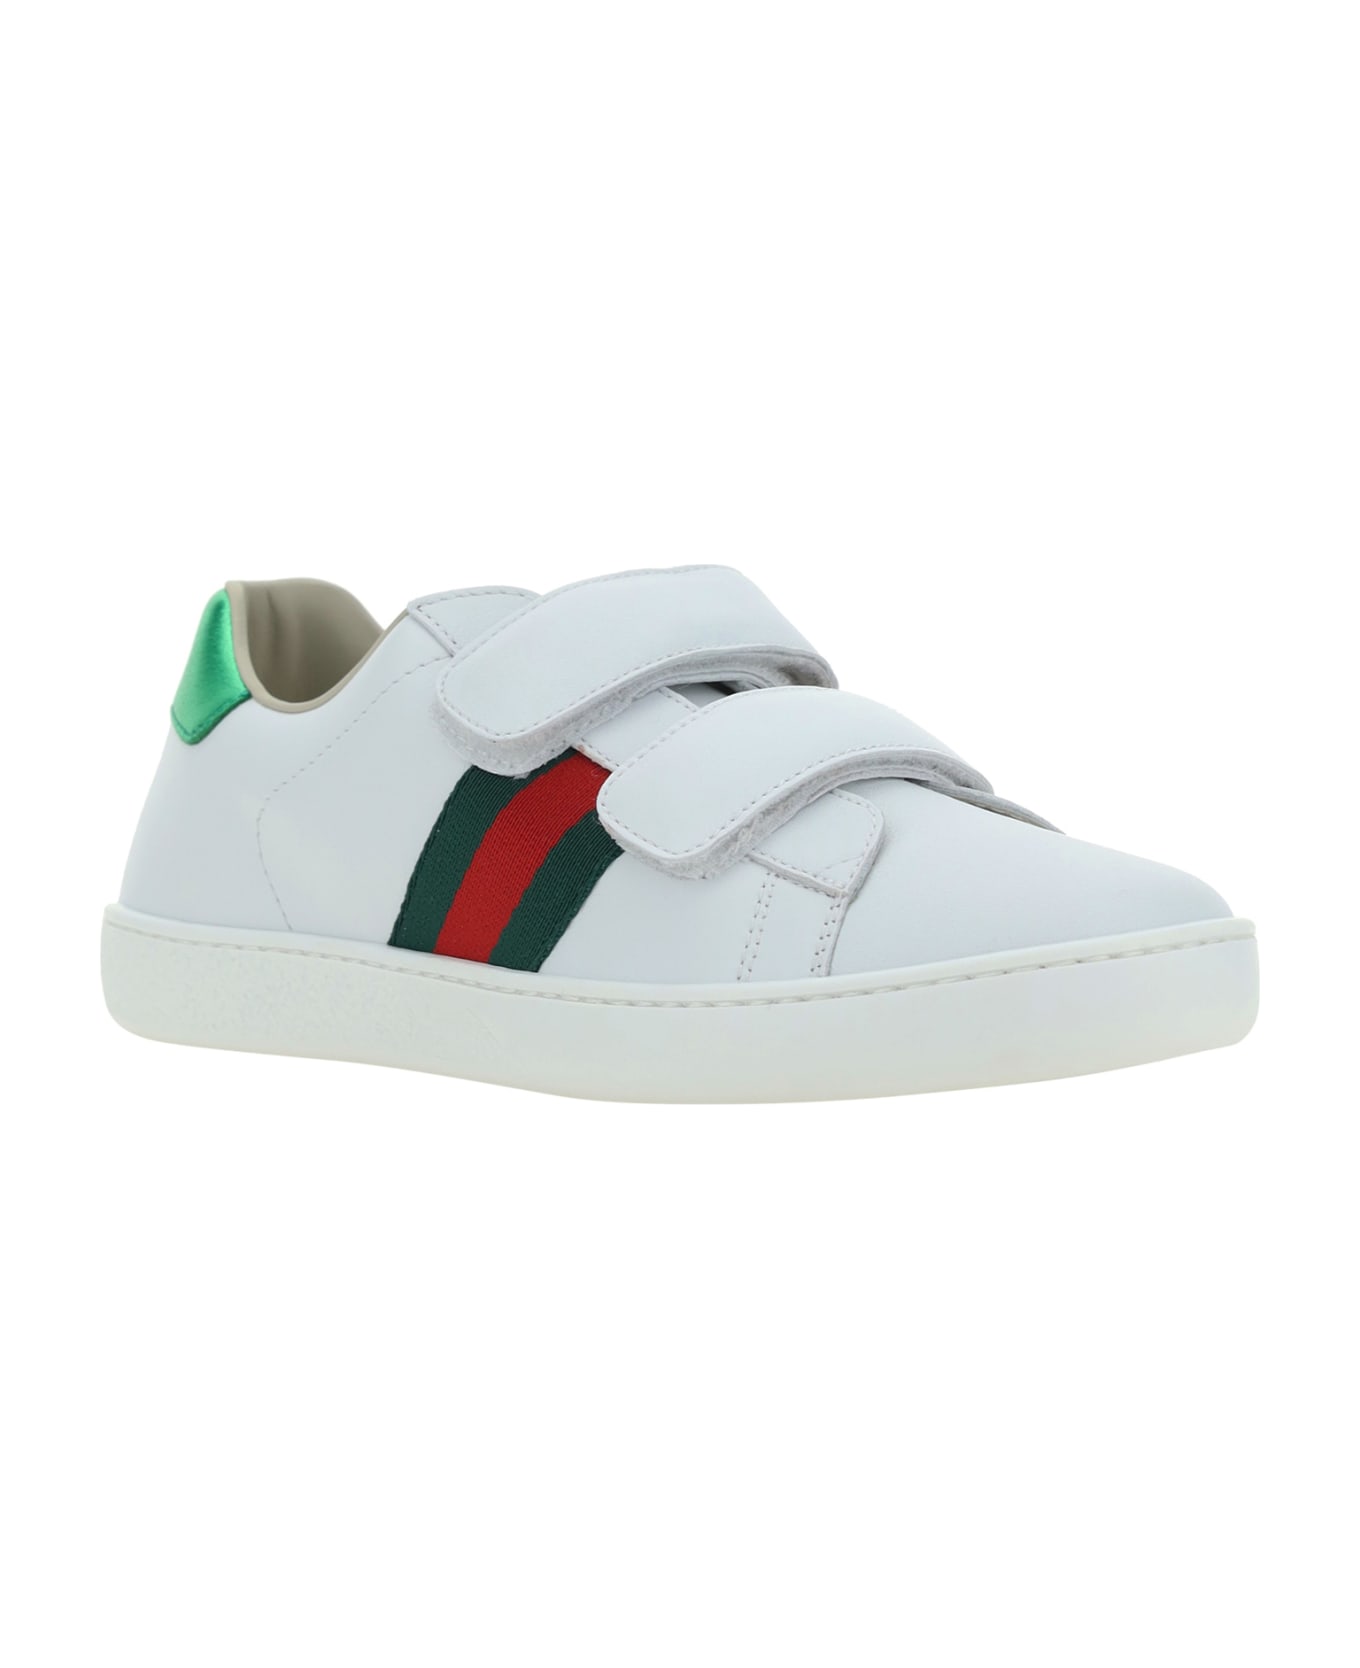 Gucci Sneakers For Boy - White